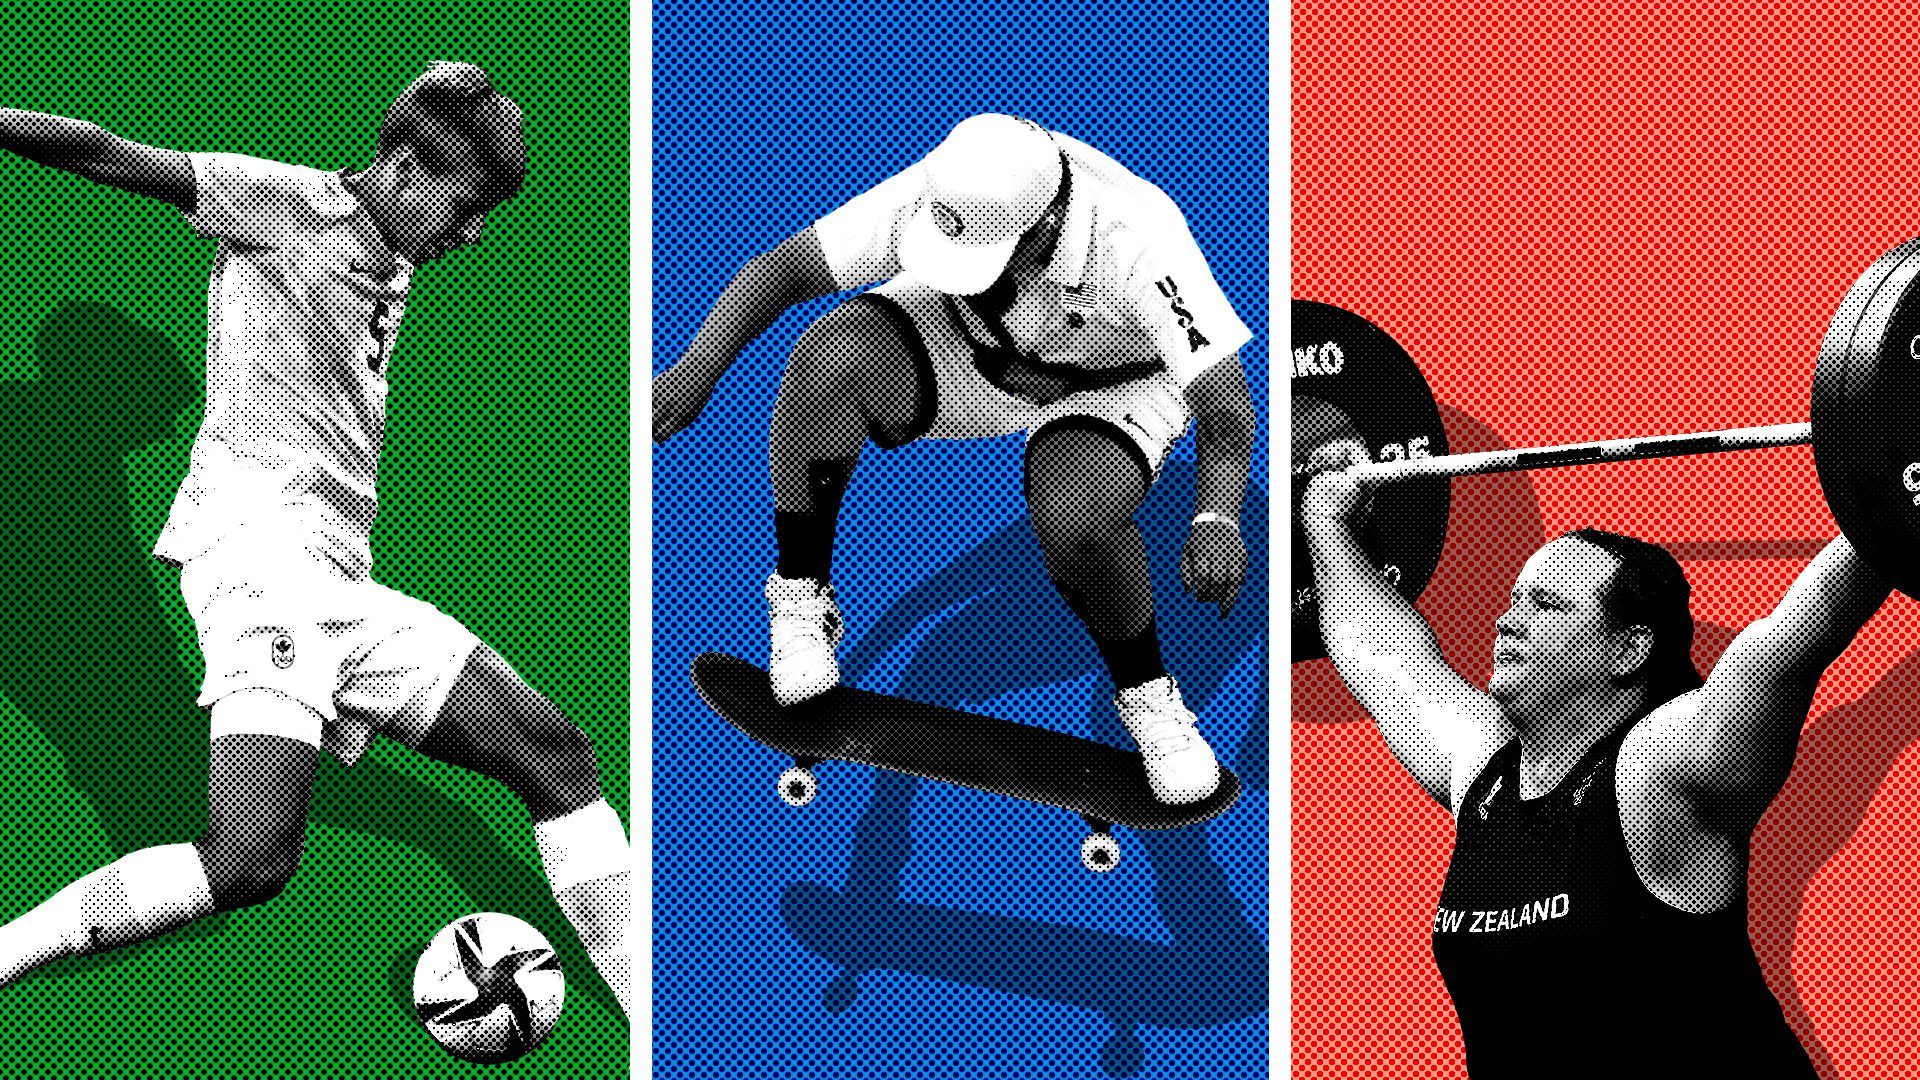 Photo illustration of Olympic athletes Quinn of Canada, Alana Smith of the United States, and Laurel Hubbard of New Zealand